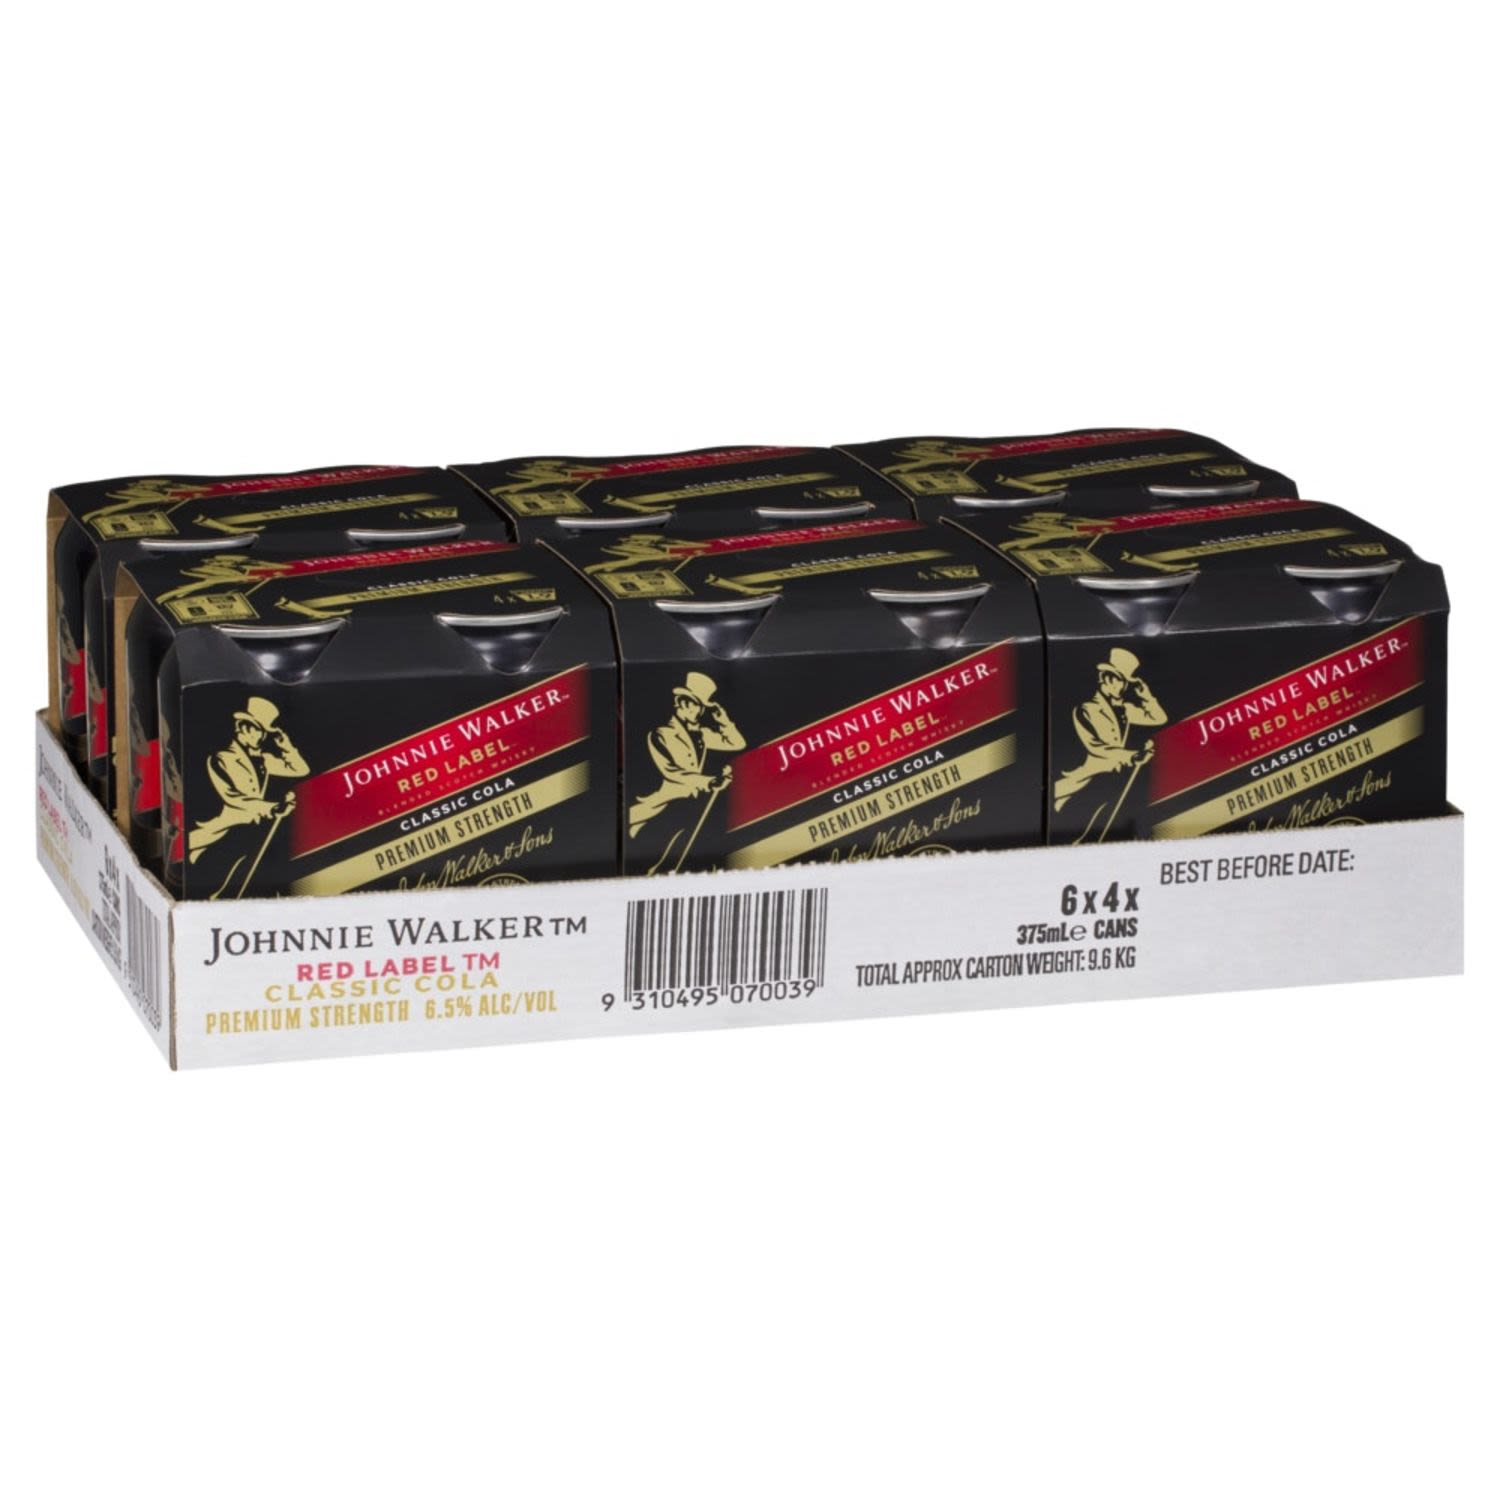 Johnnie Walker Red & Cola Premium Strength Can 6.5% 375mL 24 Pack